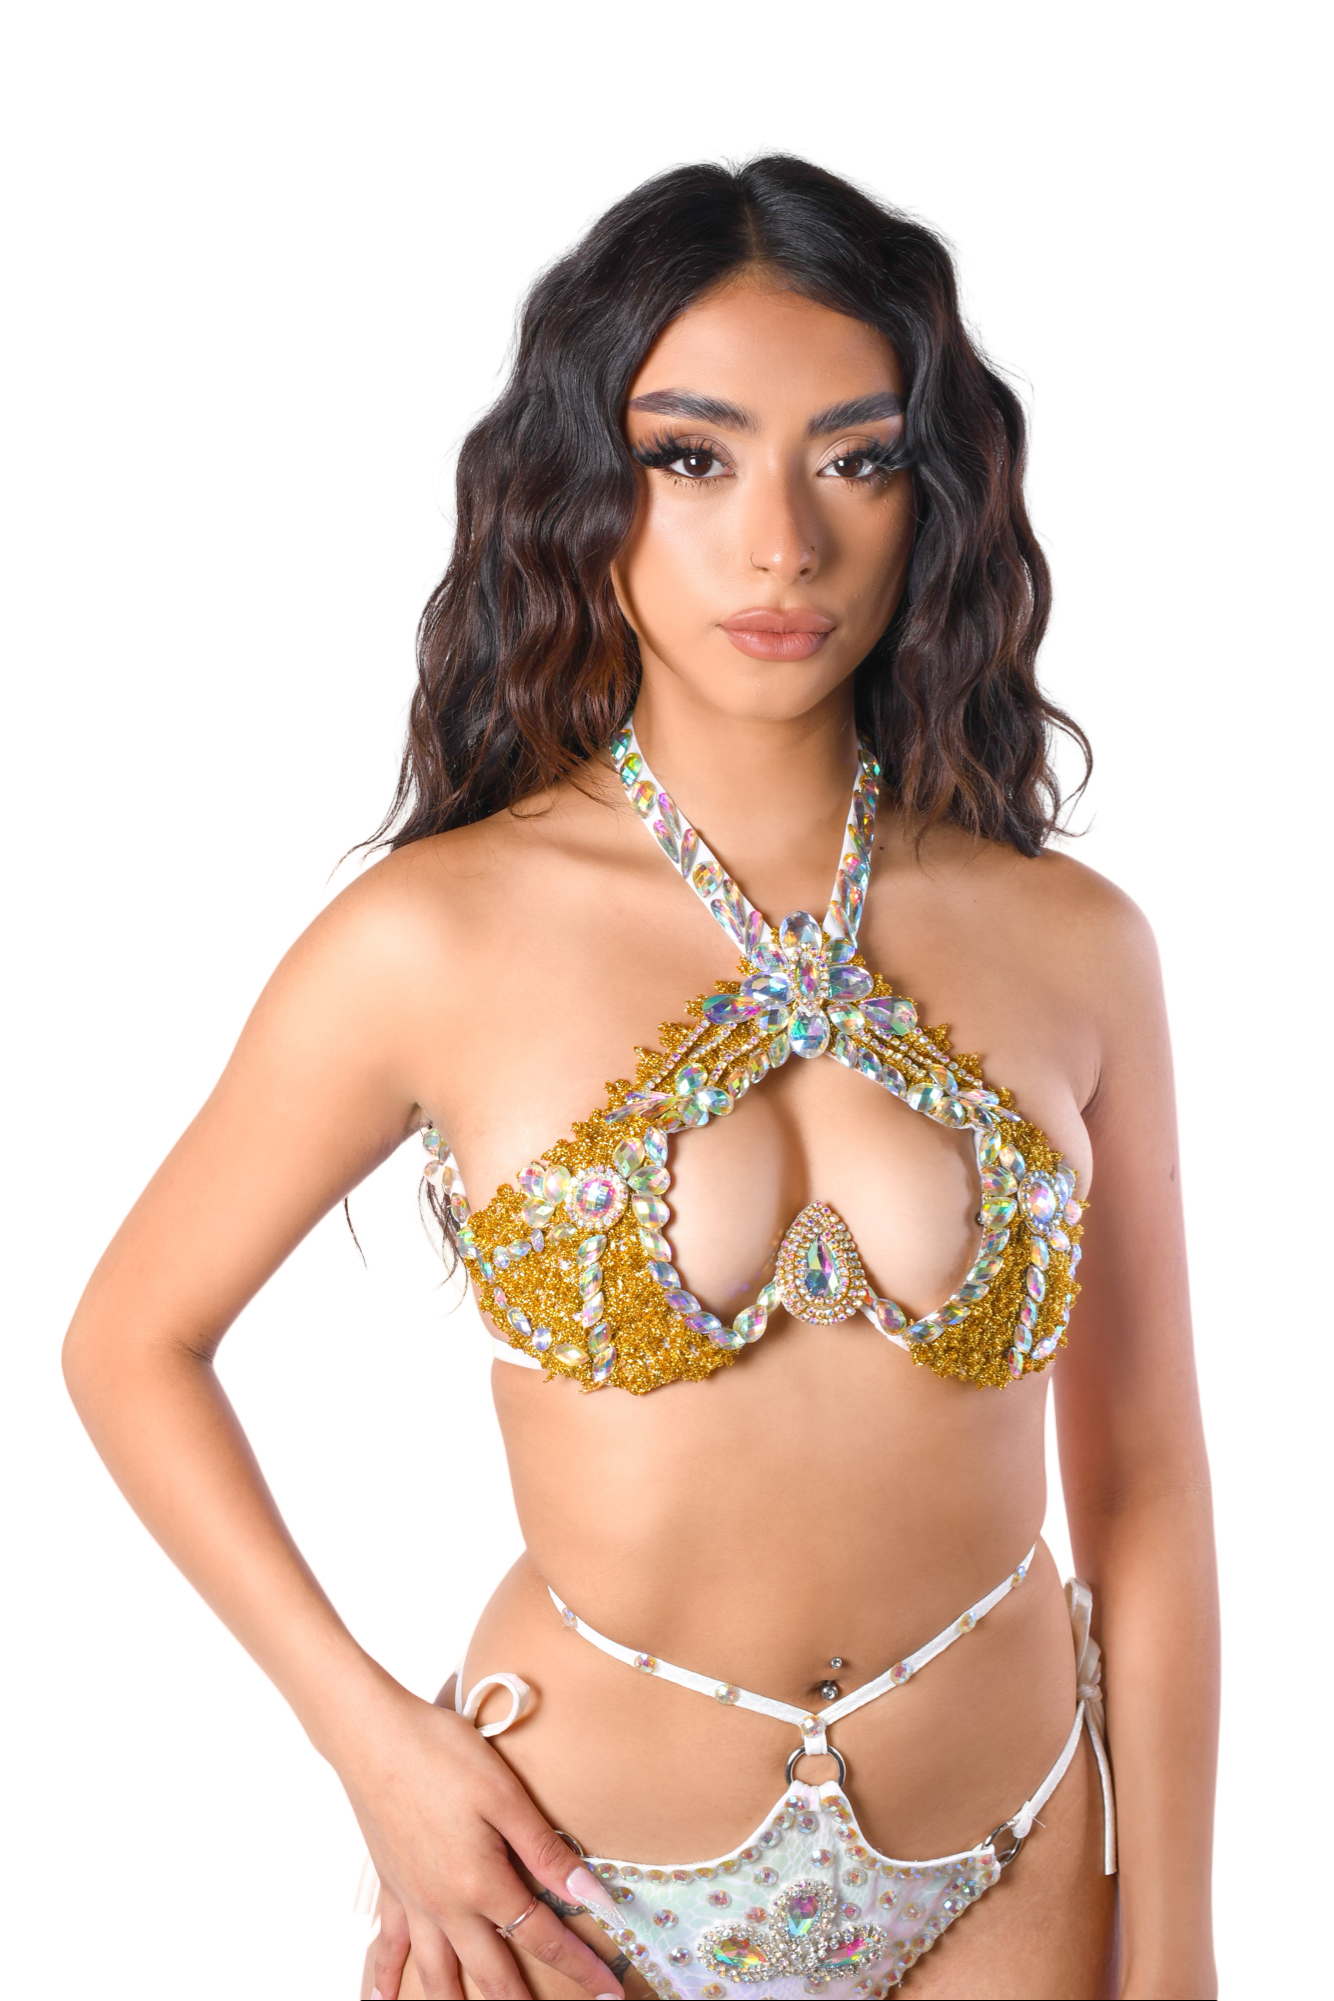 CUSTOM SIZE Holographic Mermaid Bra Rave Bra Rave Outfit Dance